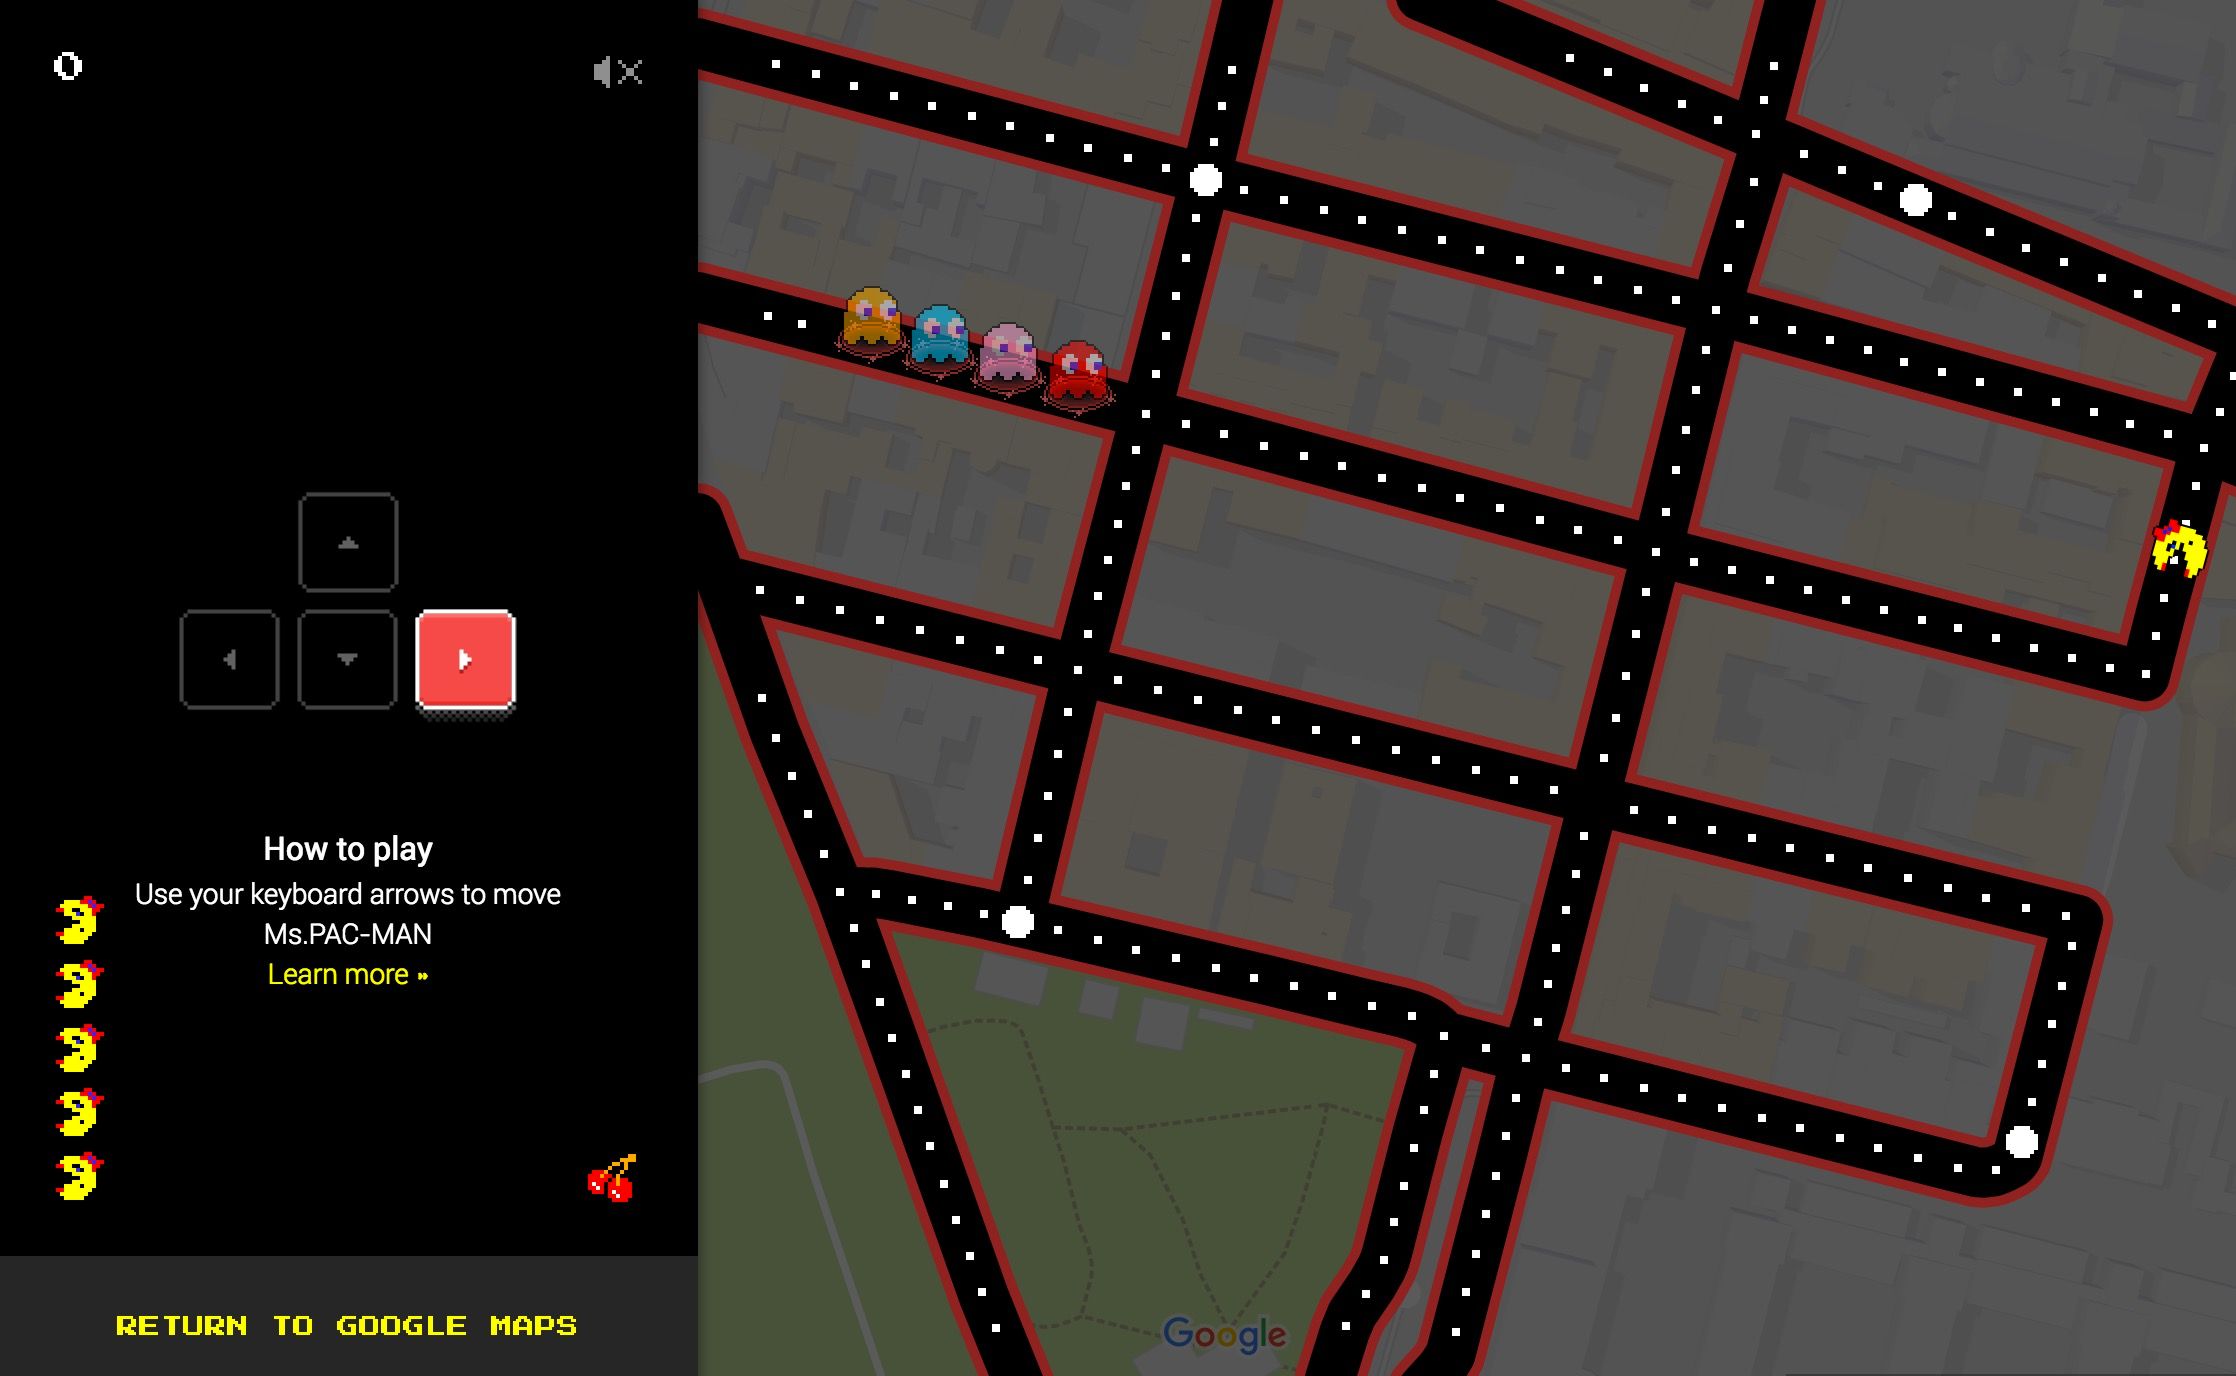 google maps is a ms pac man arcade game for april fools’ day image 1